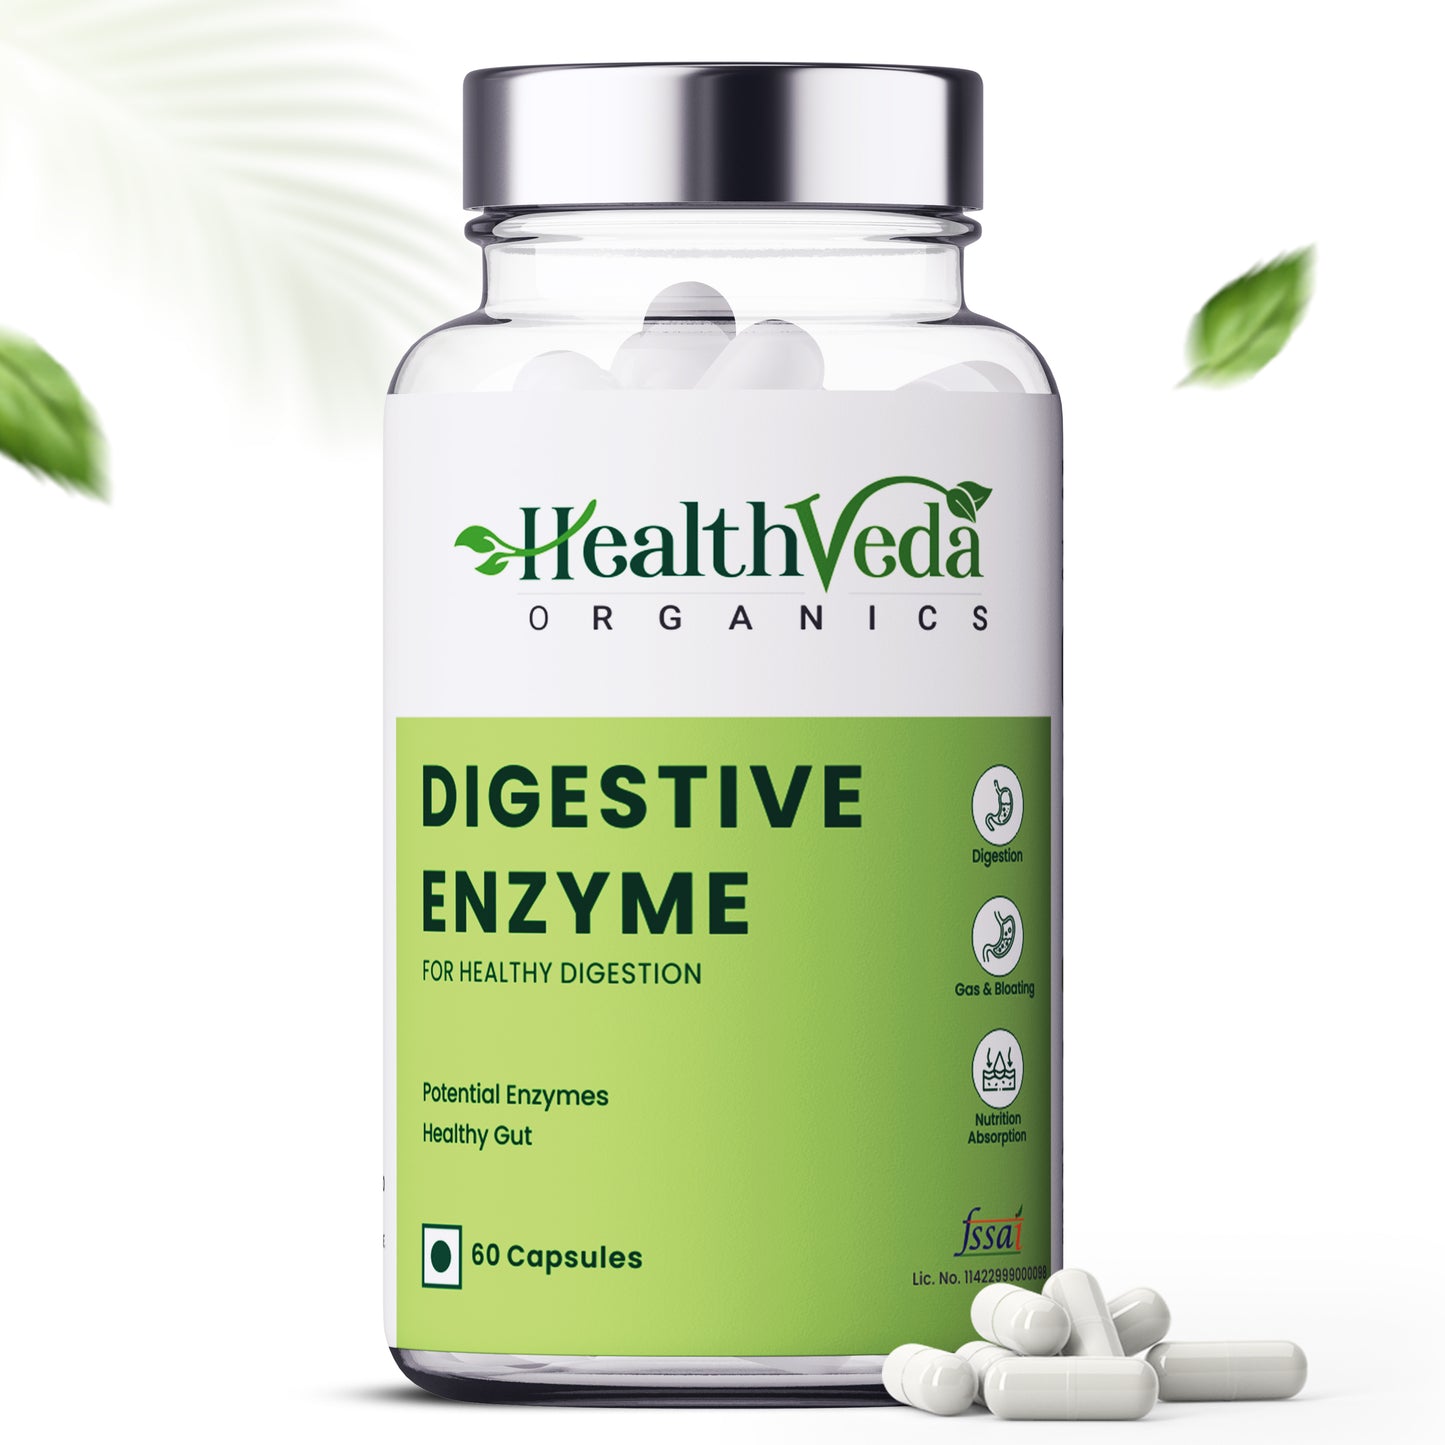 Health Veda Organics Digestive Enzyme Capsules with Amylase, Protease, Glucoamylase | 60 Veg Capsules | Better Digestive Function, Healthy Gut & Health Management | For both Men & Women